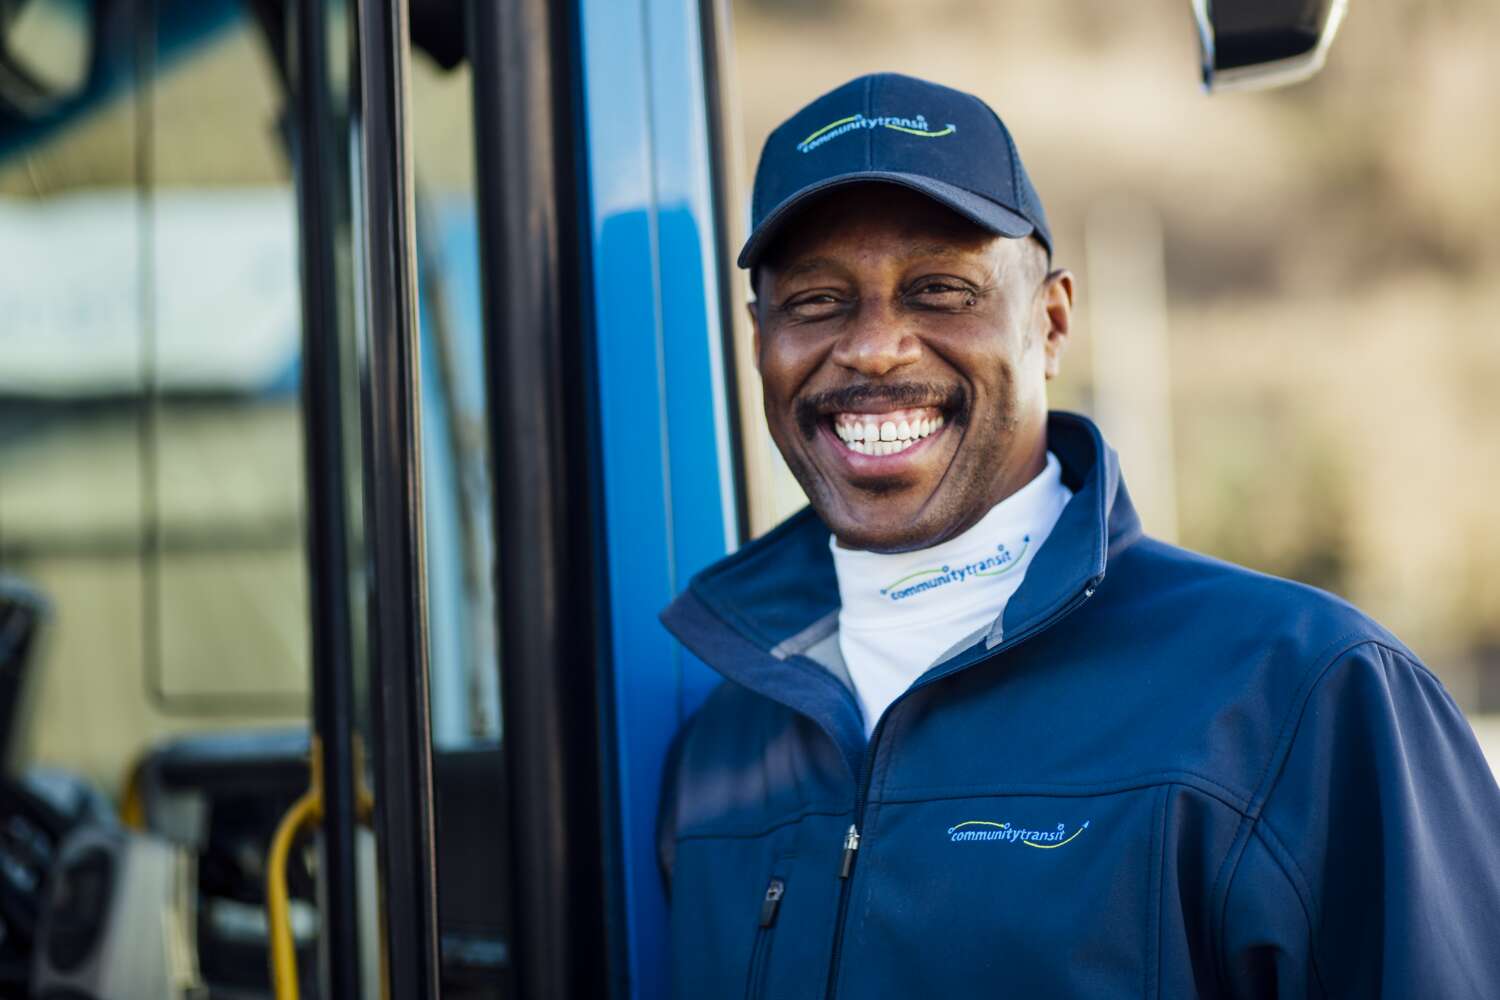 A smiling bus driver stands in front of a CT bus.